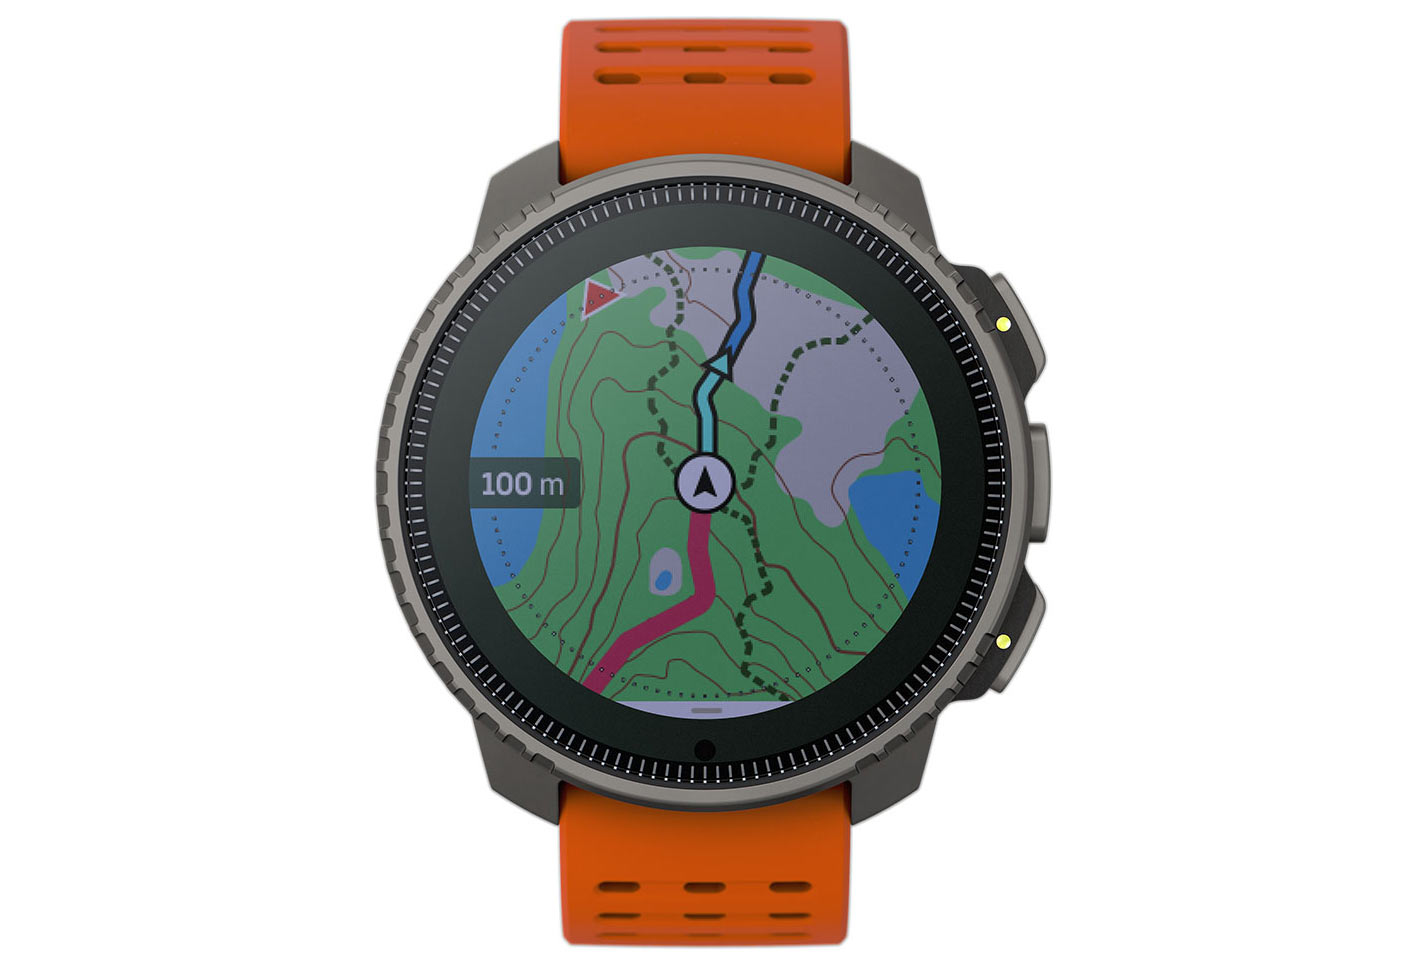 How to use the terrain maps in your Suunto Vertical